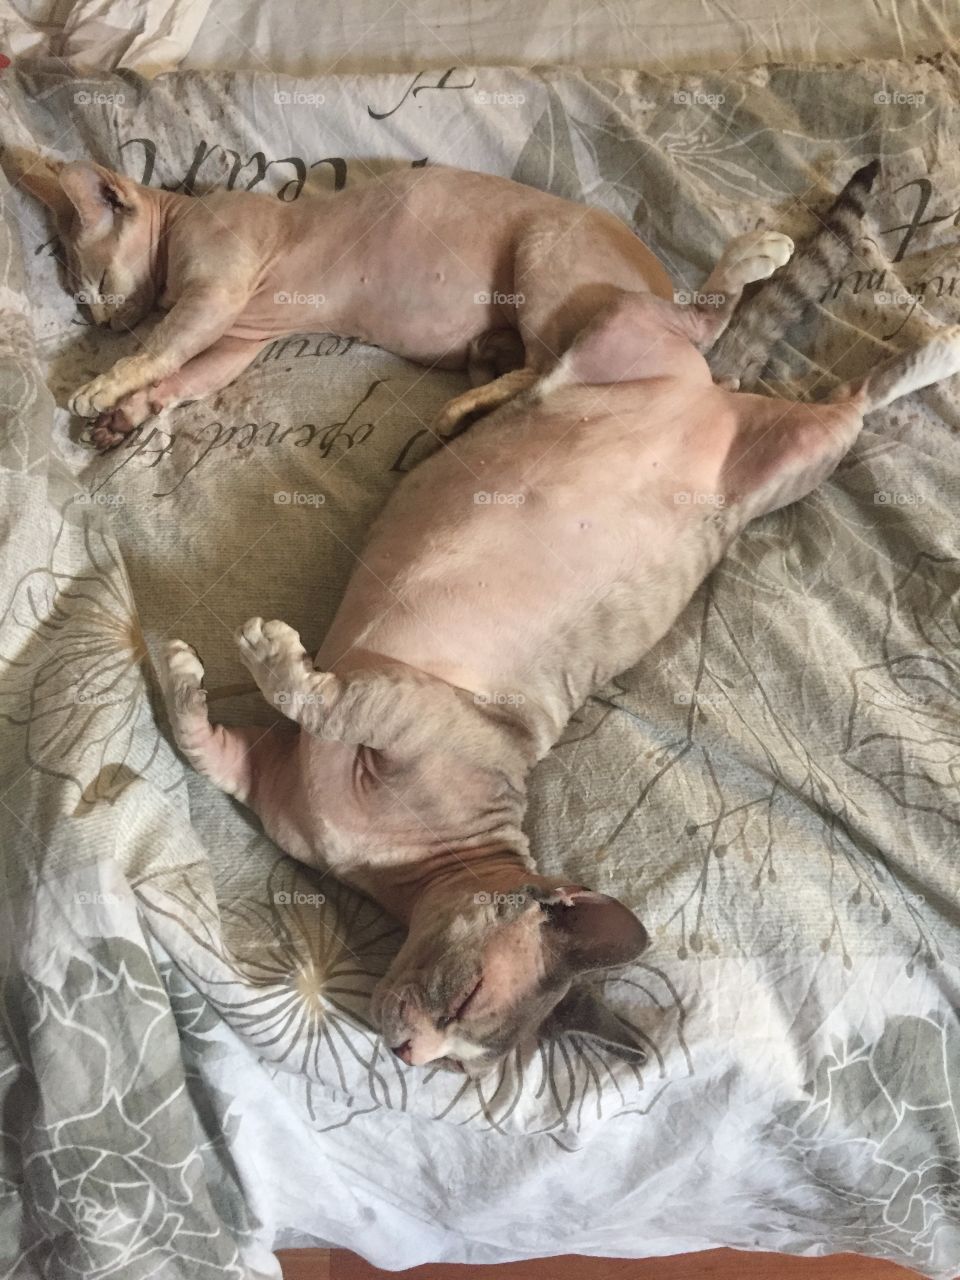 Our sleeping bambino Sphynx cats in the hot summer day 